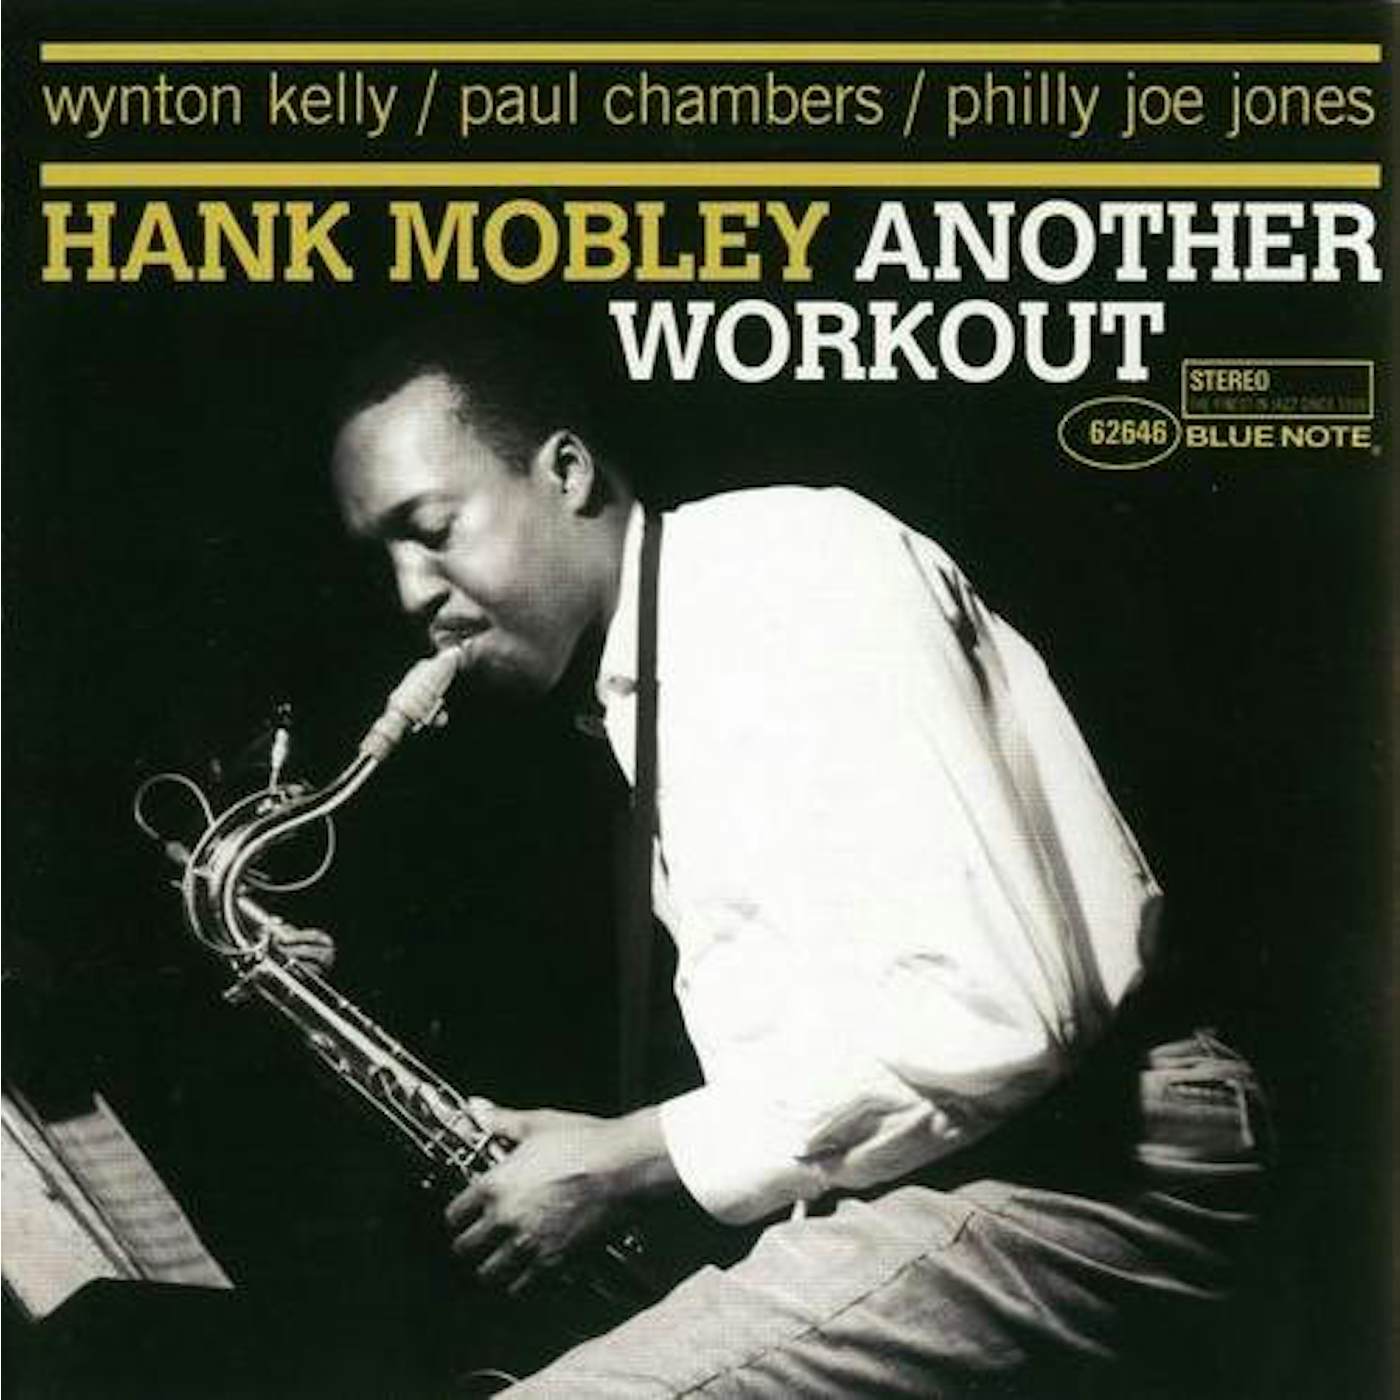 Hank Mobley Another Workout Vinyl Record